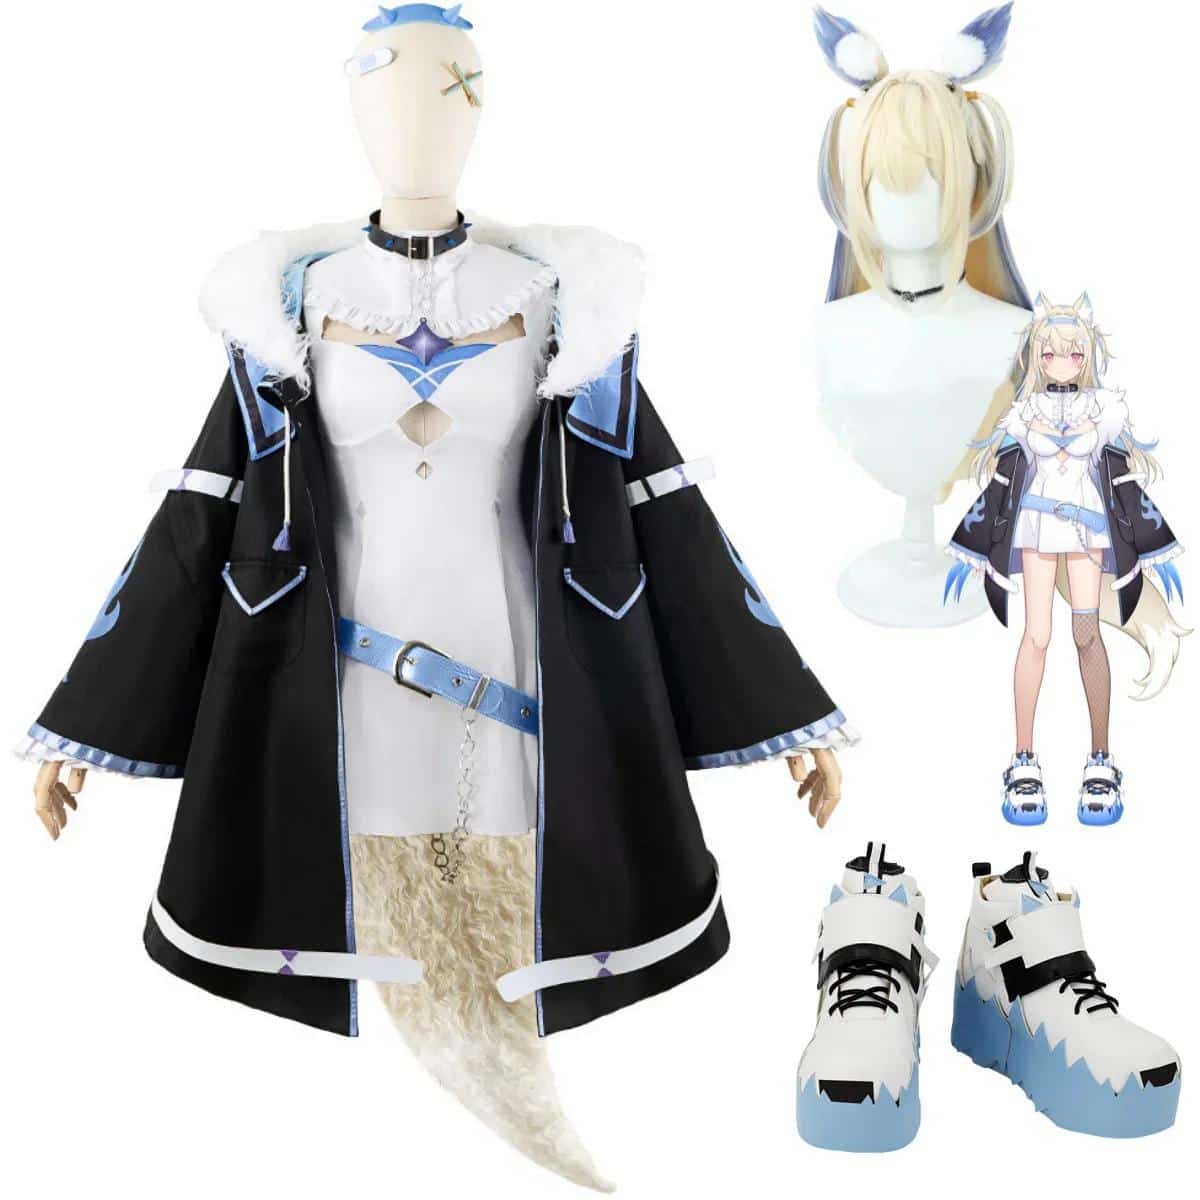 Anime Vtuber Abyssgard Fuwawa Cosplay Costume Hololive EN Advent 3rd Generation Fuwamoco Wig Uniform Boots Woman Sexy Party Suit 1